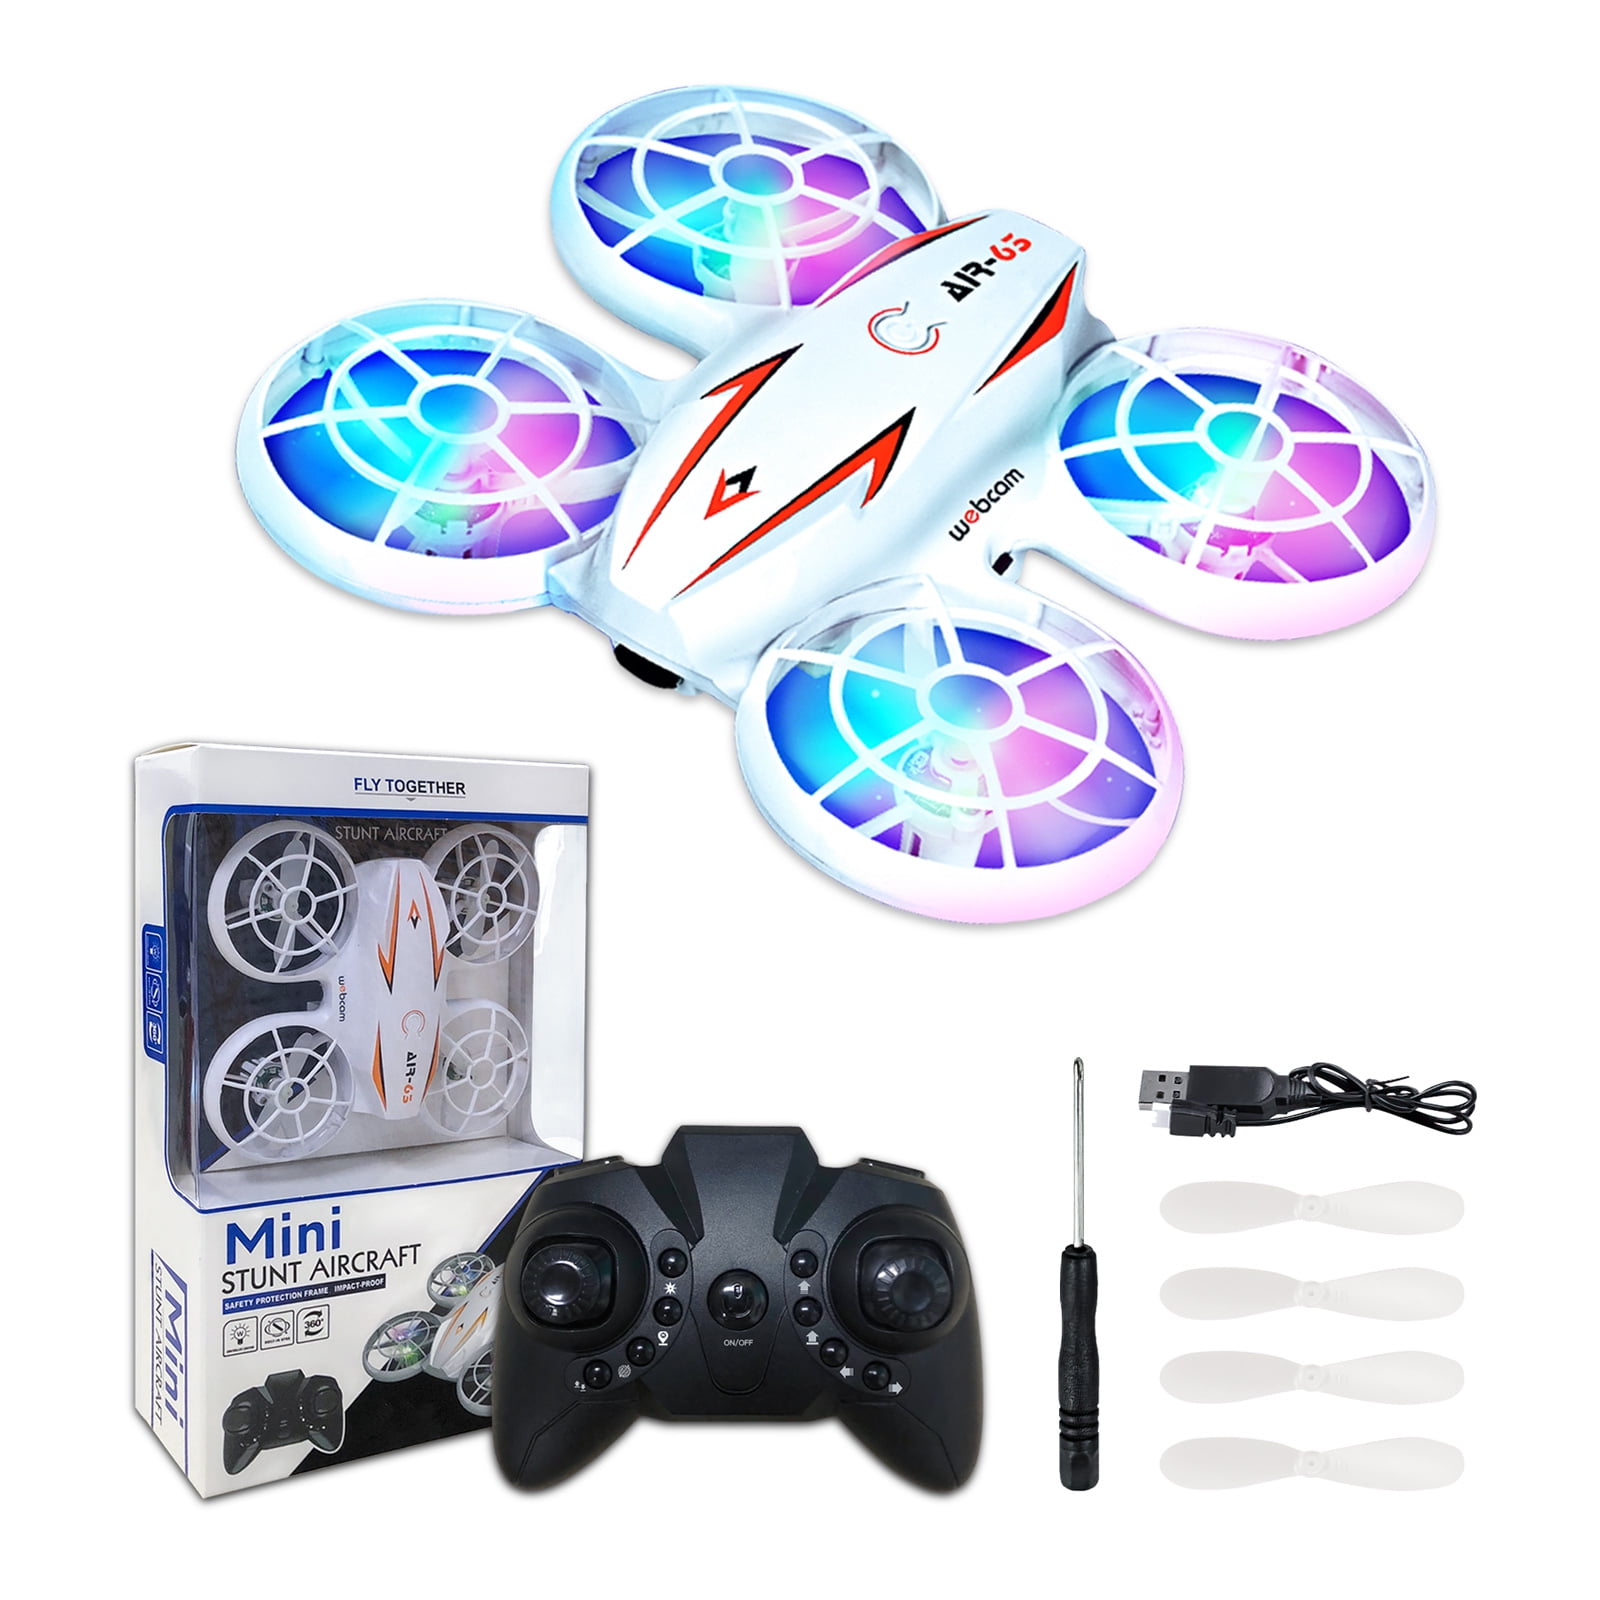 FEBFOXS Drones for Kids, Mini Drone with Remote Control, Toy Quadcopter Drone Three Speeds, Lights, 360 Flip, Headless Mode and Automatic Obstacle Avoidance Mode, White - Walmart.com